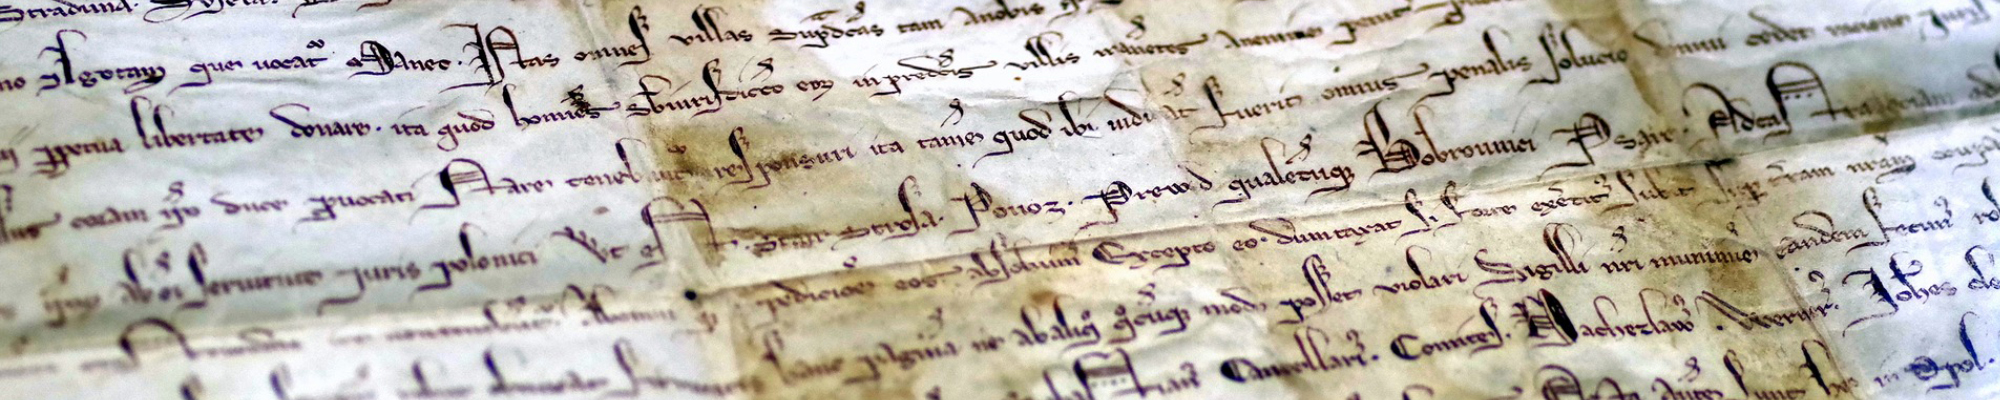 old writing on parchment